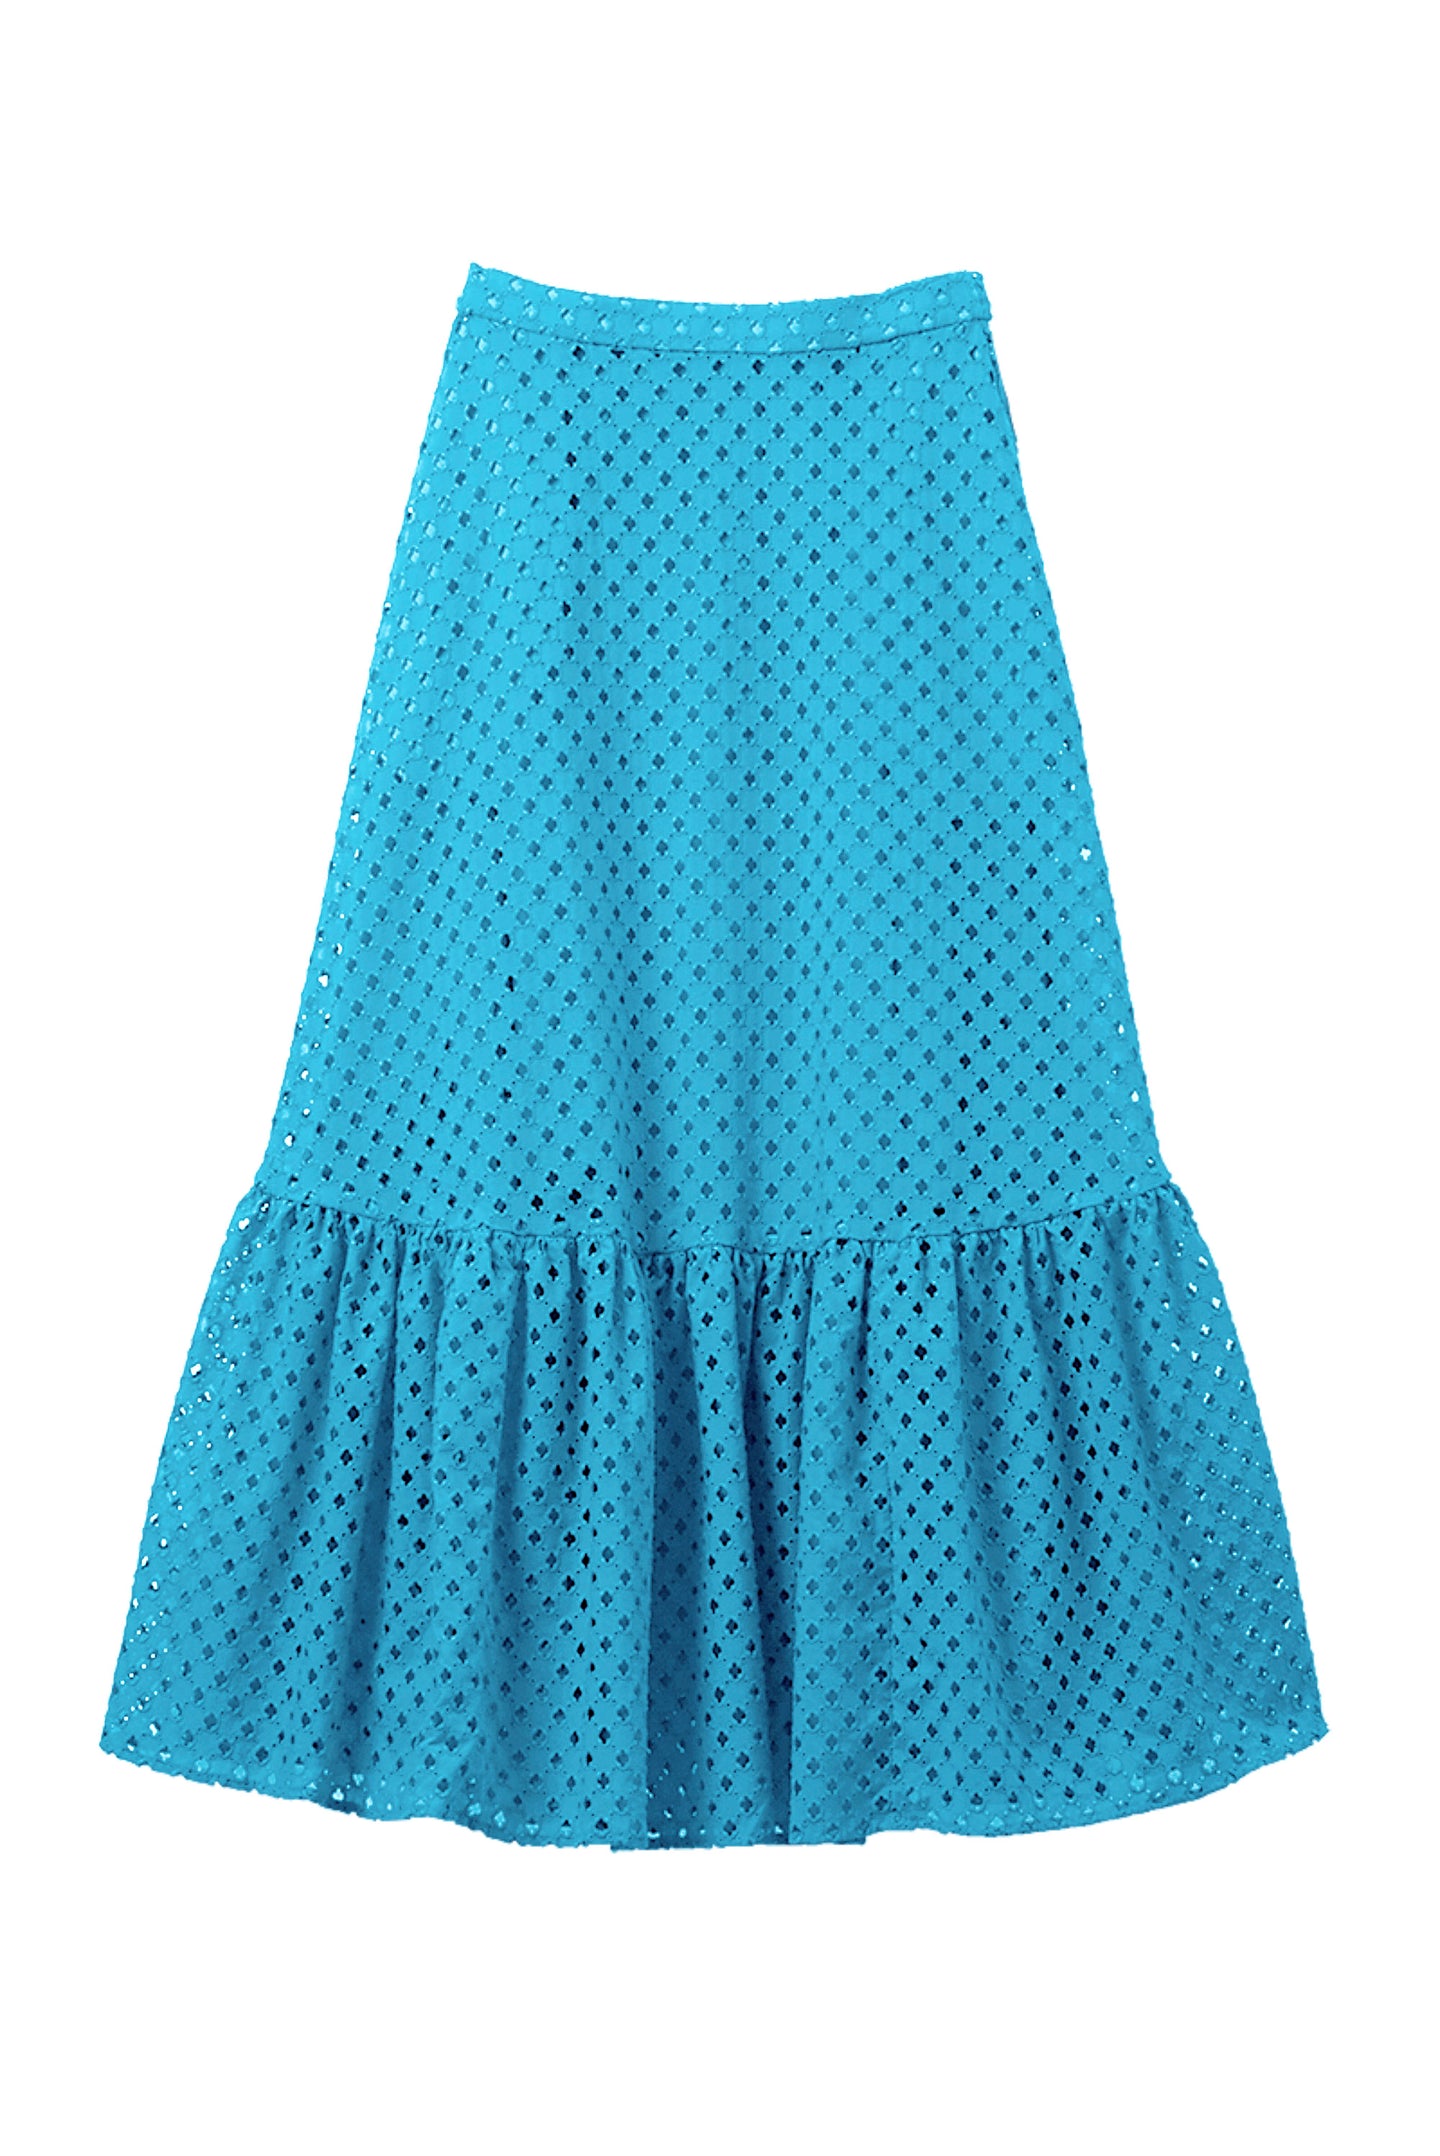 Cotton Lace Tiered Skirt | Turquoise Blue